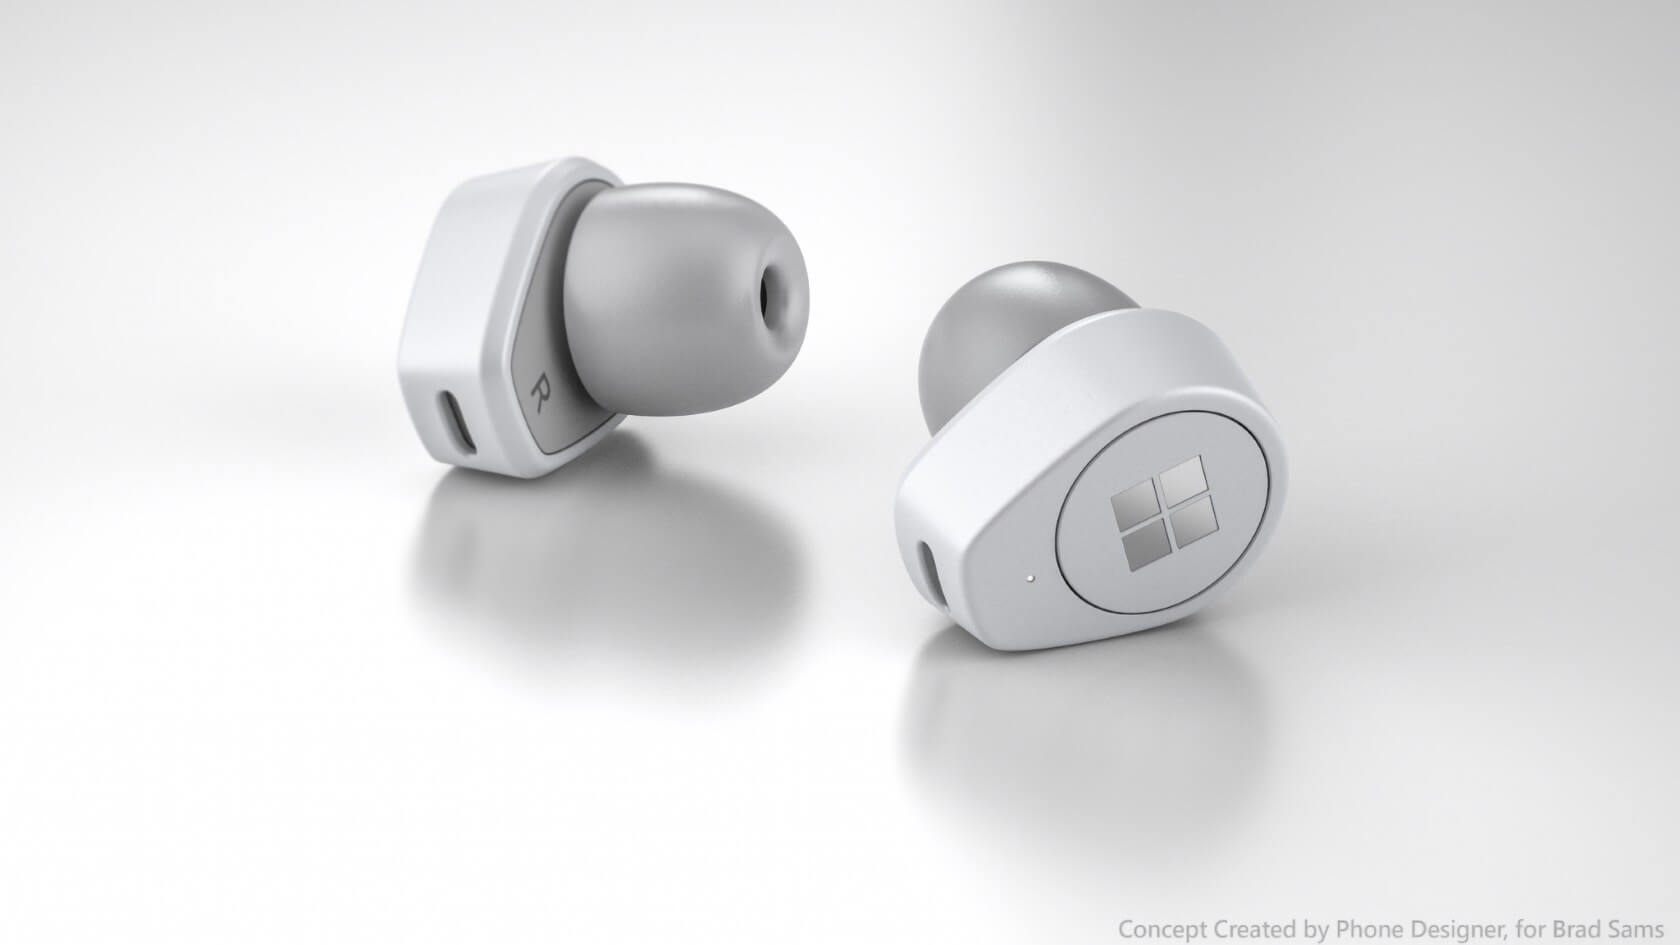 Microsoft is reportedly planning to roll out its own Surface-branded AirPods alternative